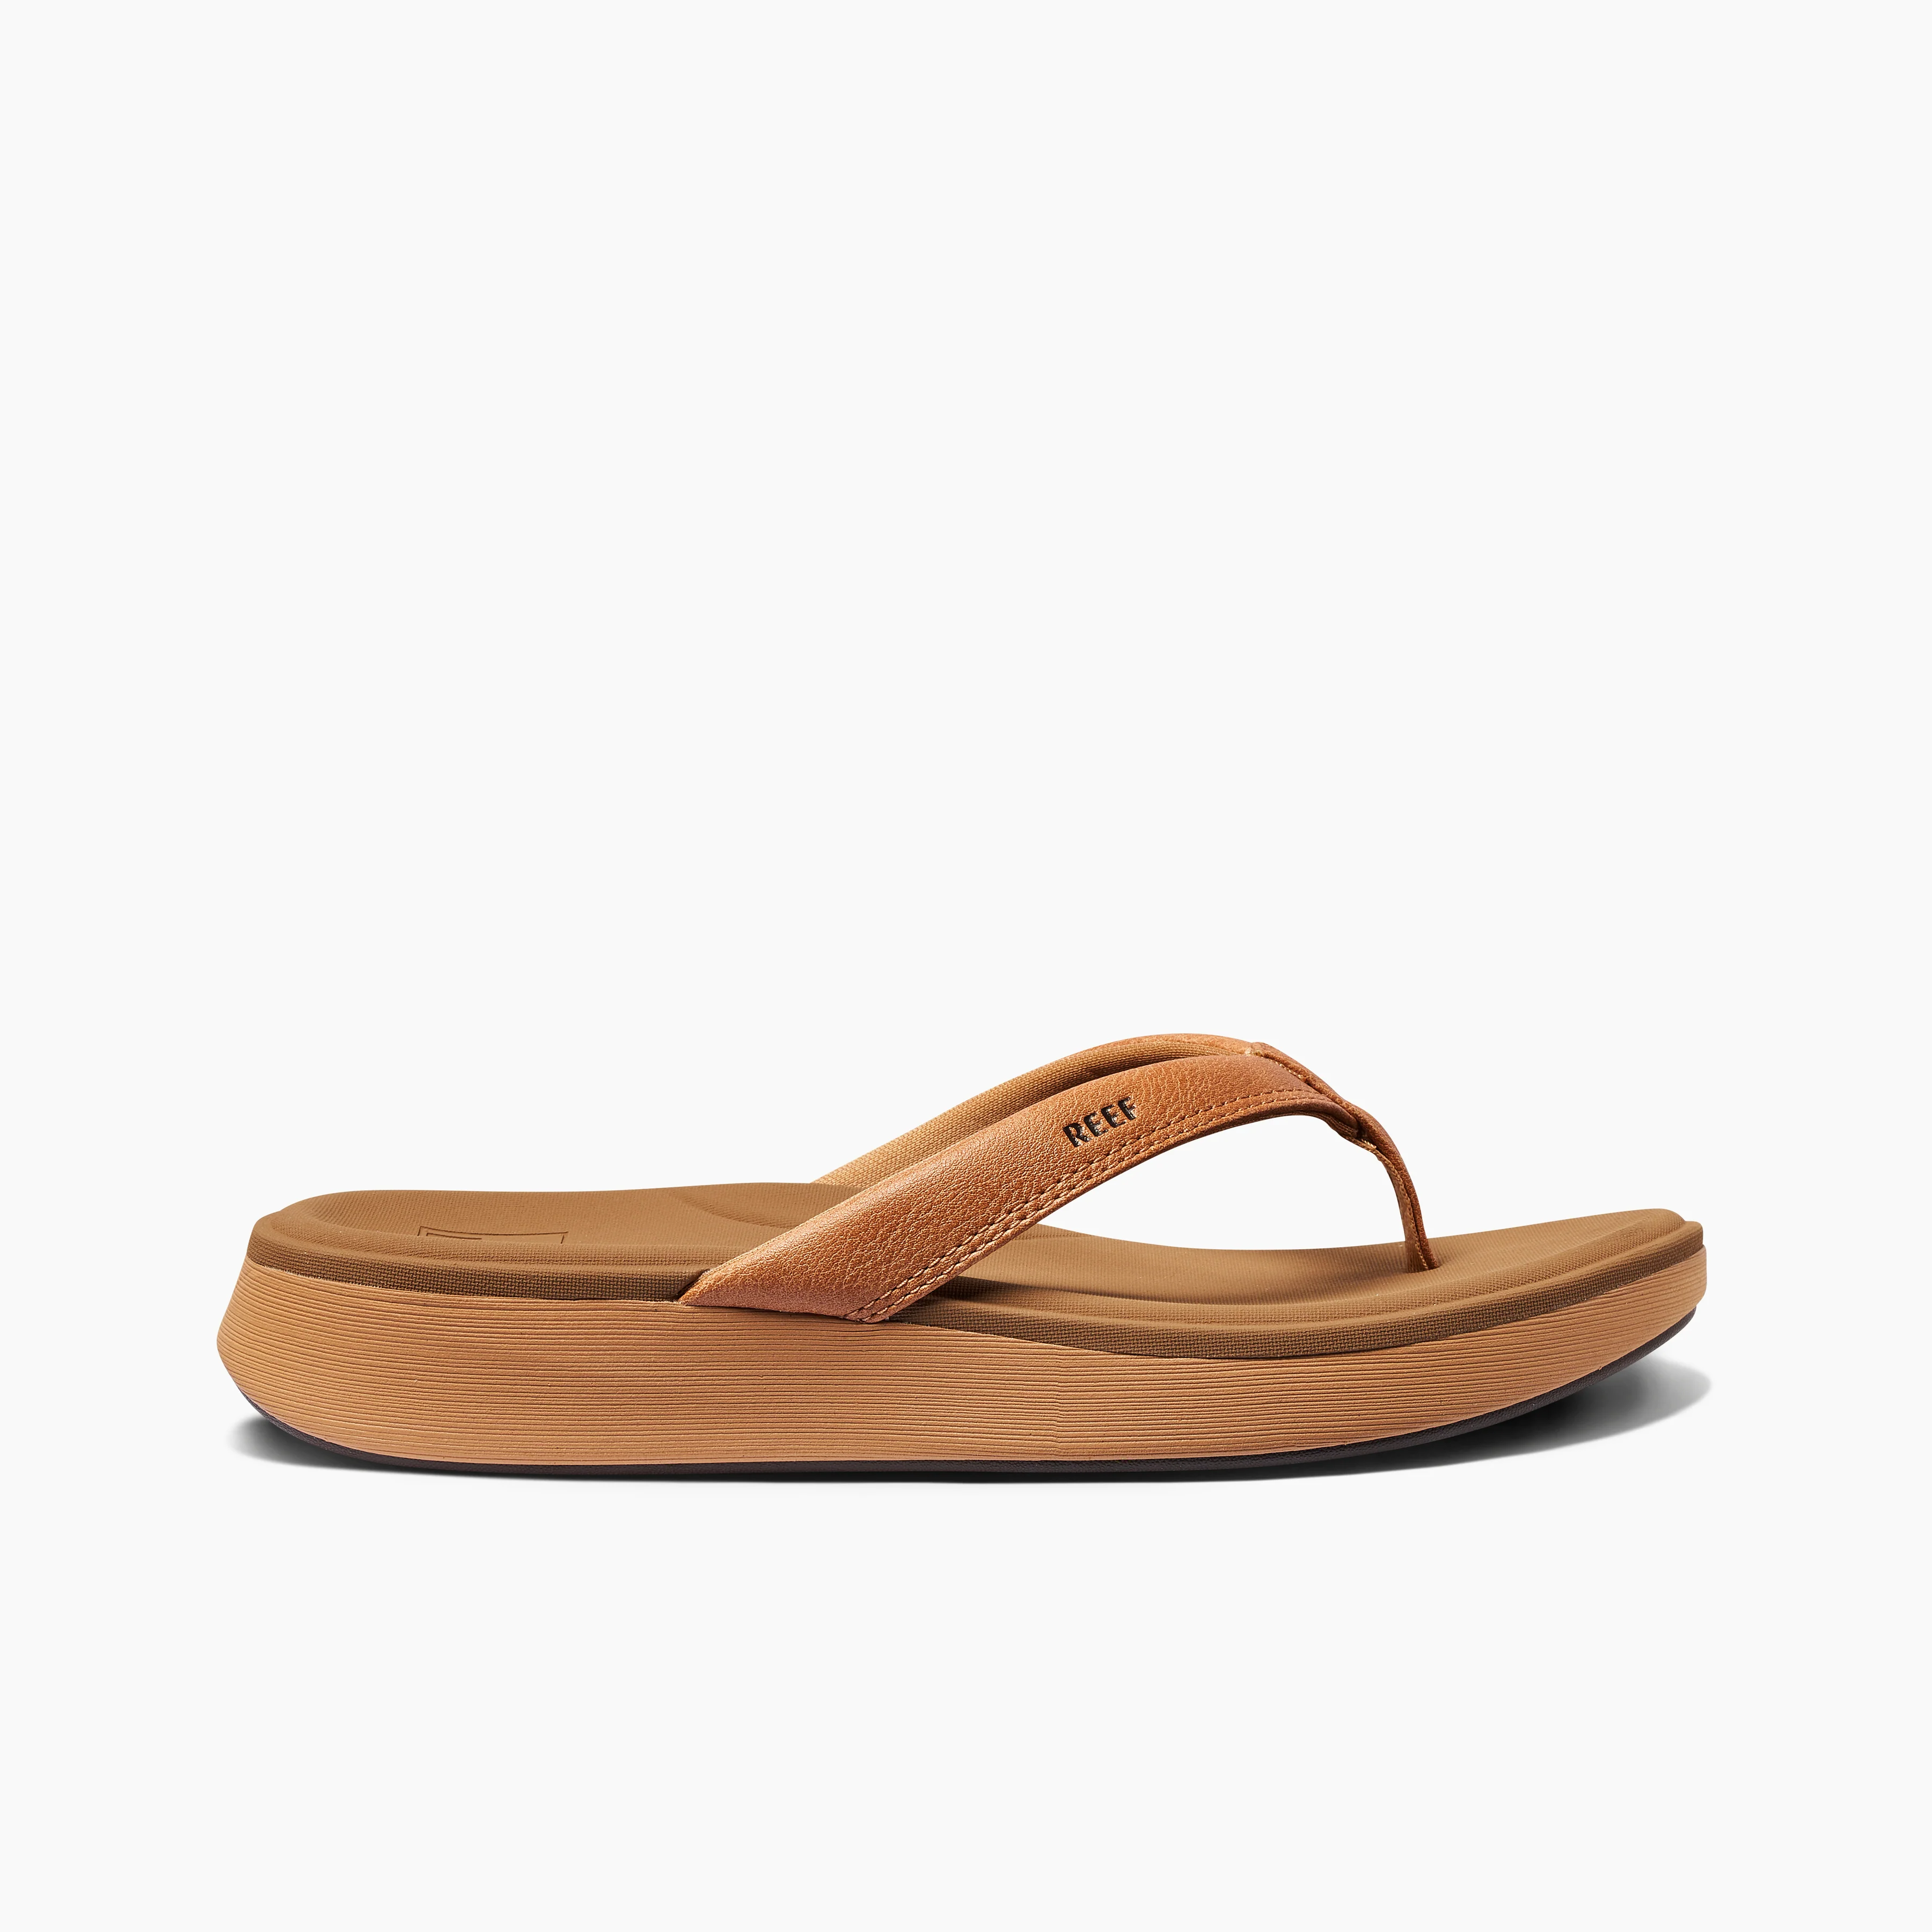 Women's Cushion Cloud Sandals in Natural side view